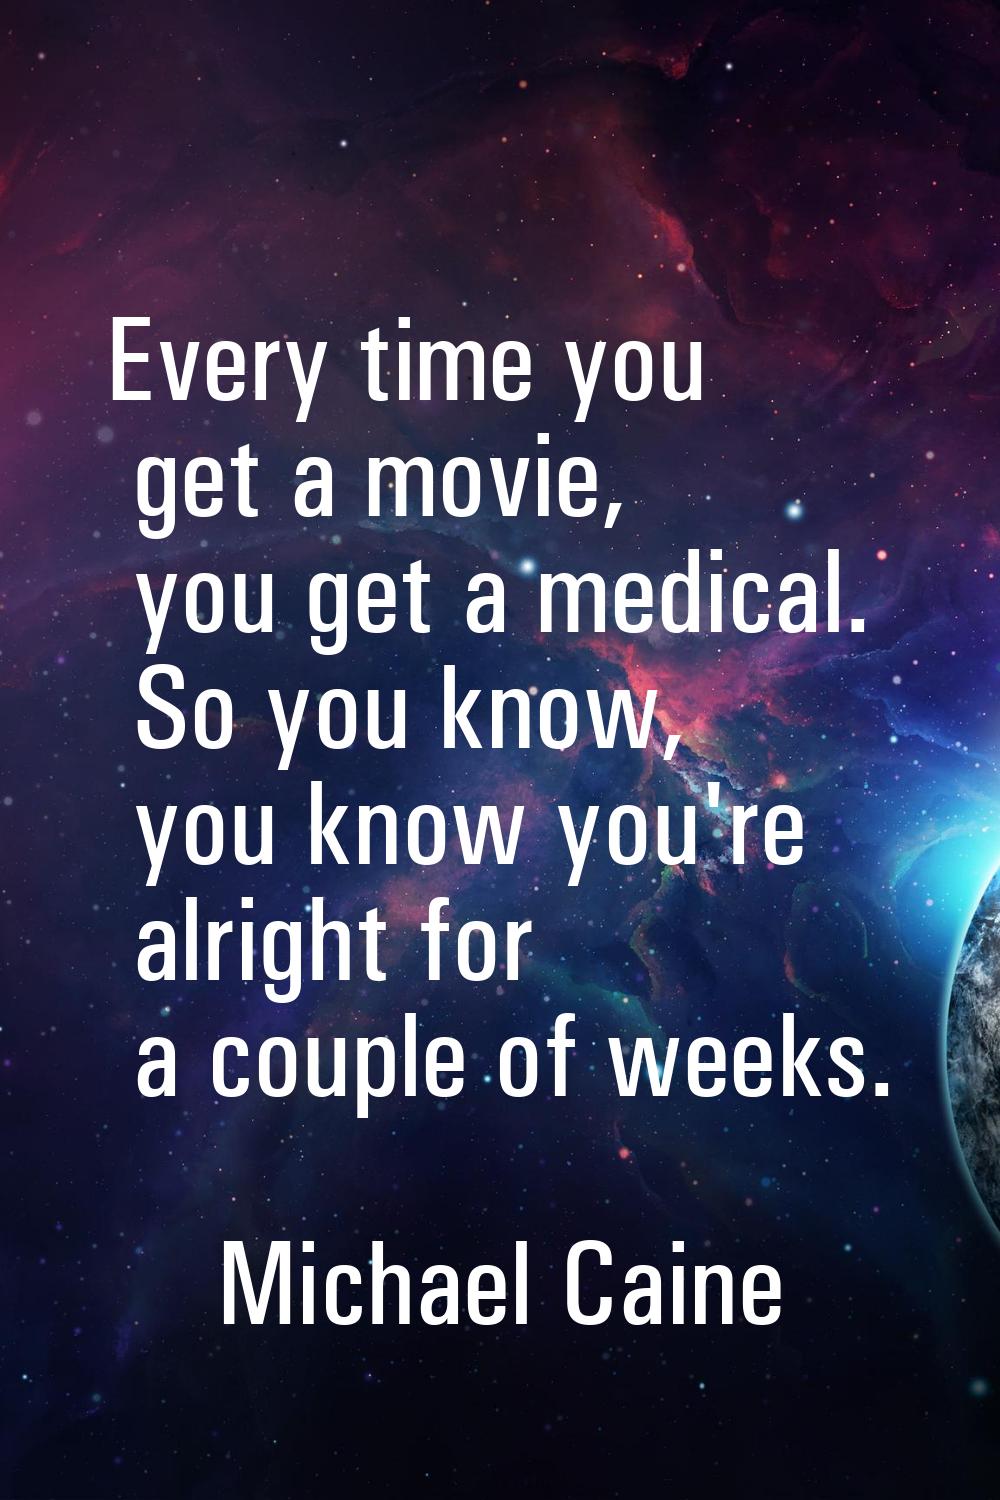 Every time you get a movie, you get a medical. So you know, you know you're alright for a couple of